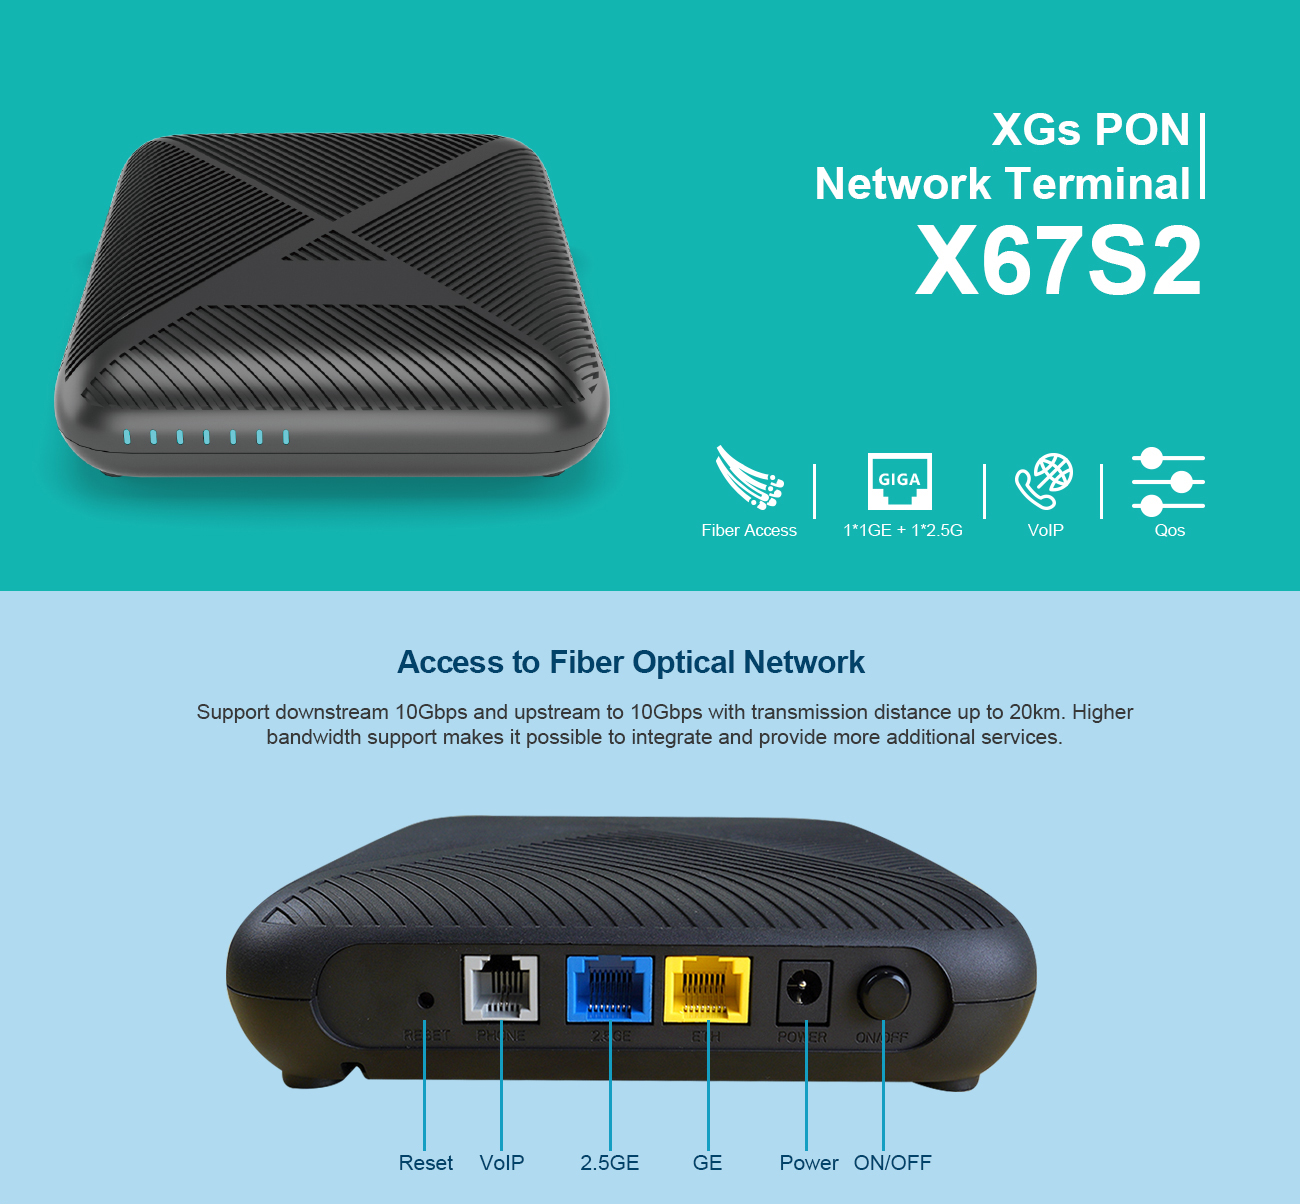 xgs pon router